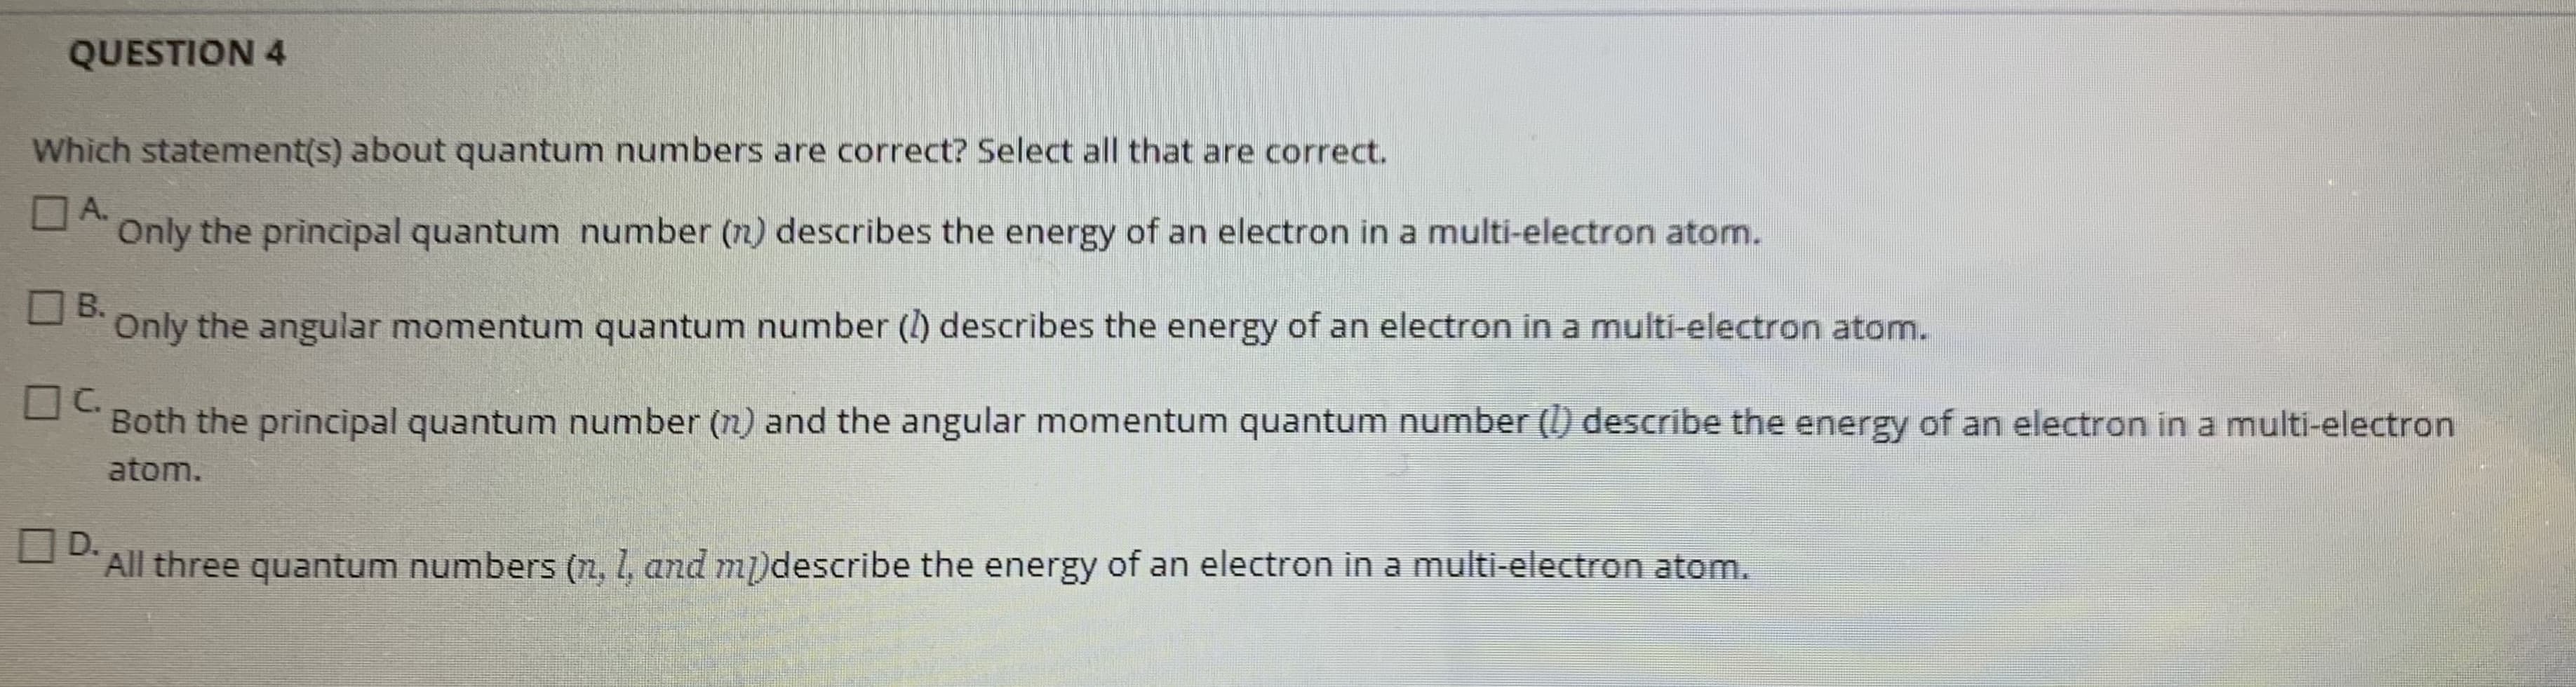 Which statement(s) about quantum numbers are correct? Select all that are correct.
OA.
Only the principal quantum number (n) describes the energy of an electron in a multi-electron atom.
В.
Only the angular momentum quantum number () describes the energy of an electron in a multi-electron atom.
C.
Both the principal quantum number (n) and the angular momentum quantum number (l) describe the energy of an electron in a multi-electron
atom.
OD.
All three quantum numbers (n, 1, and m)describe the energy of an electron in a multi-electron atom.
